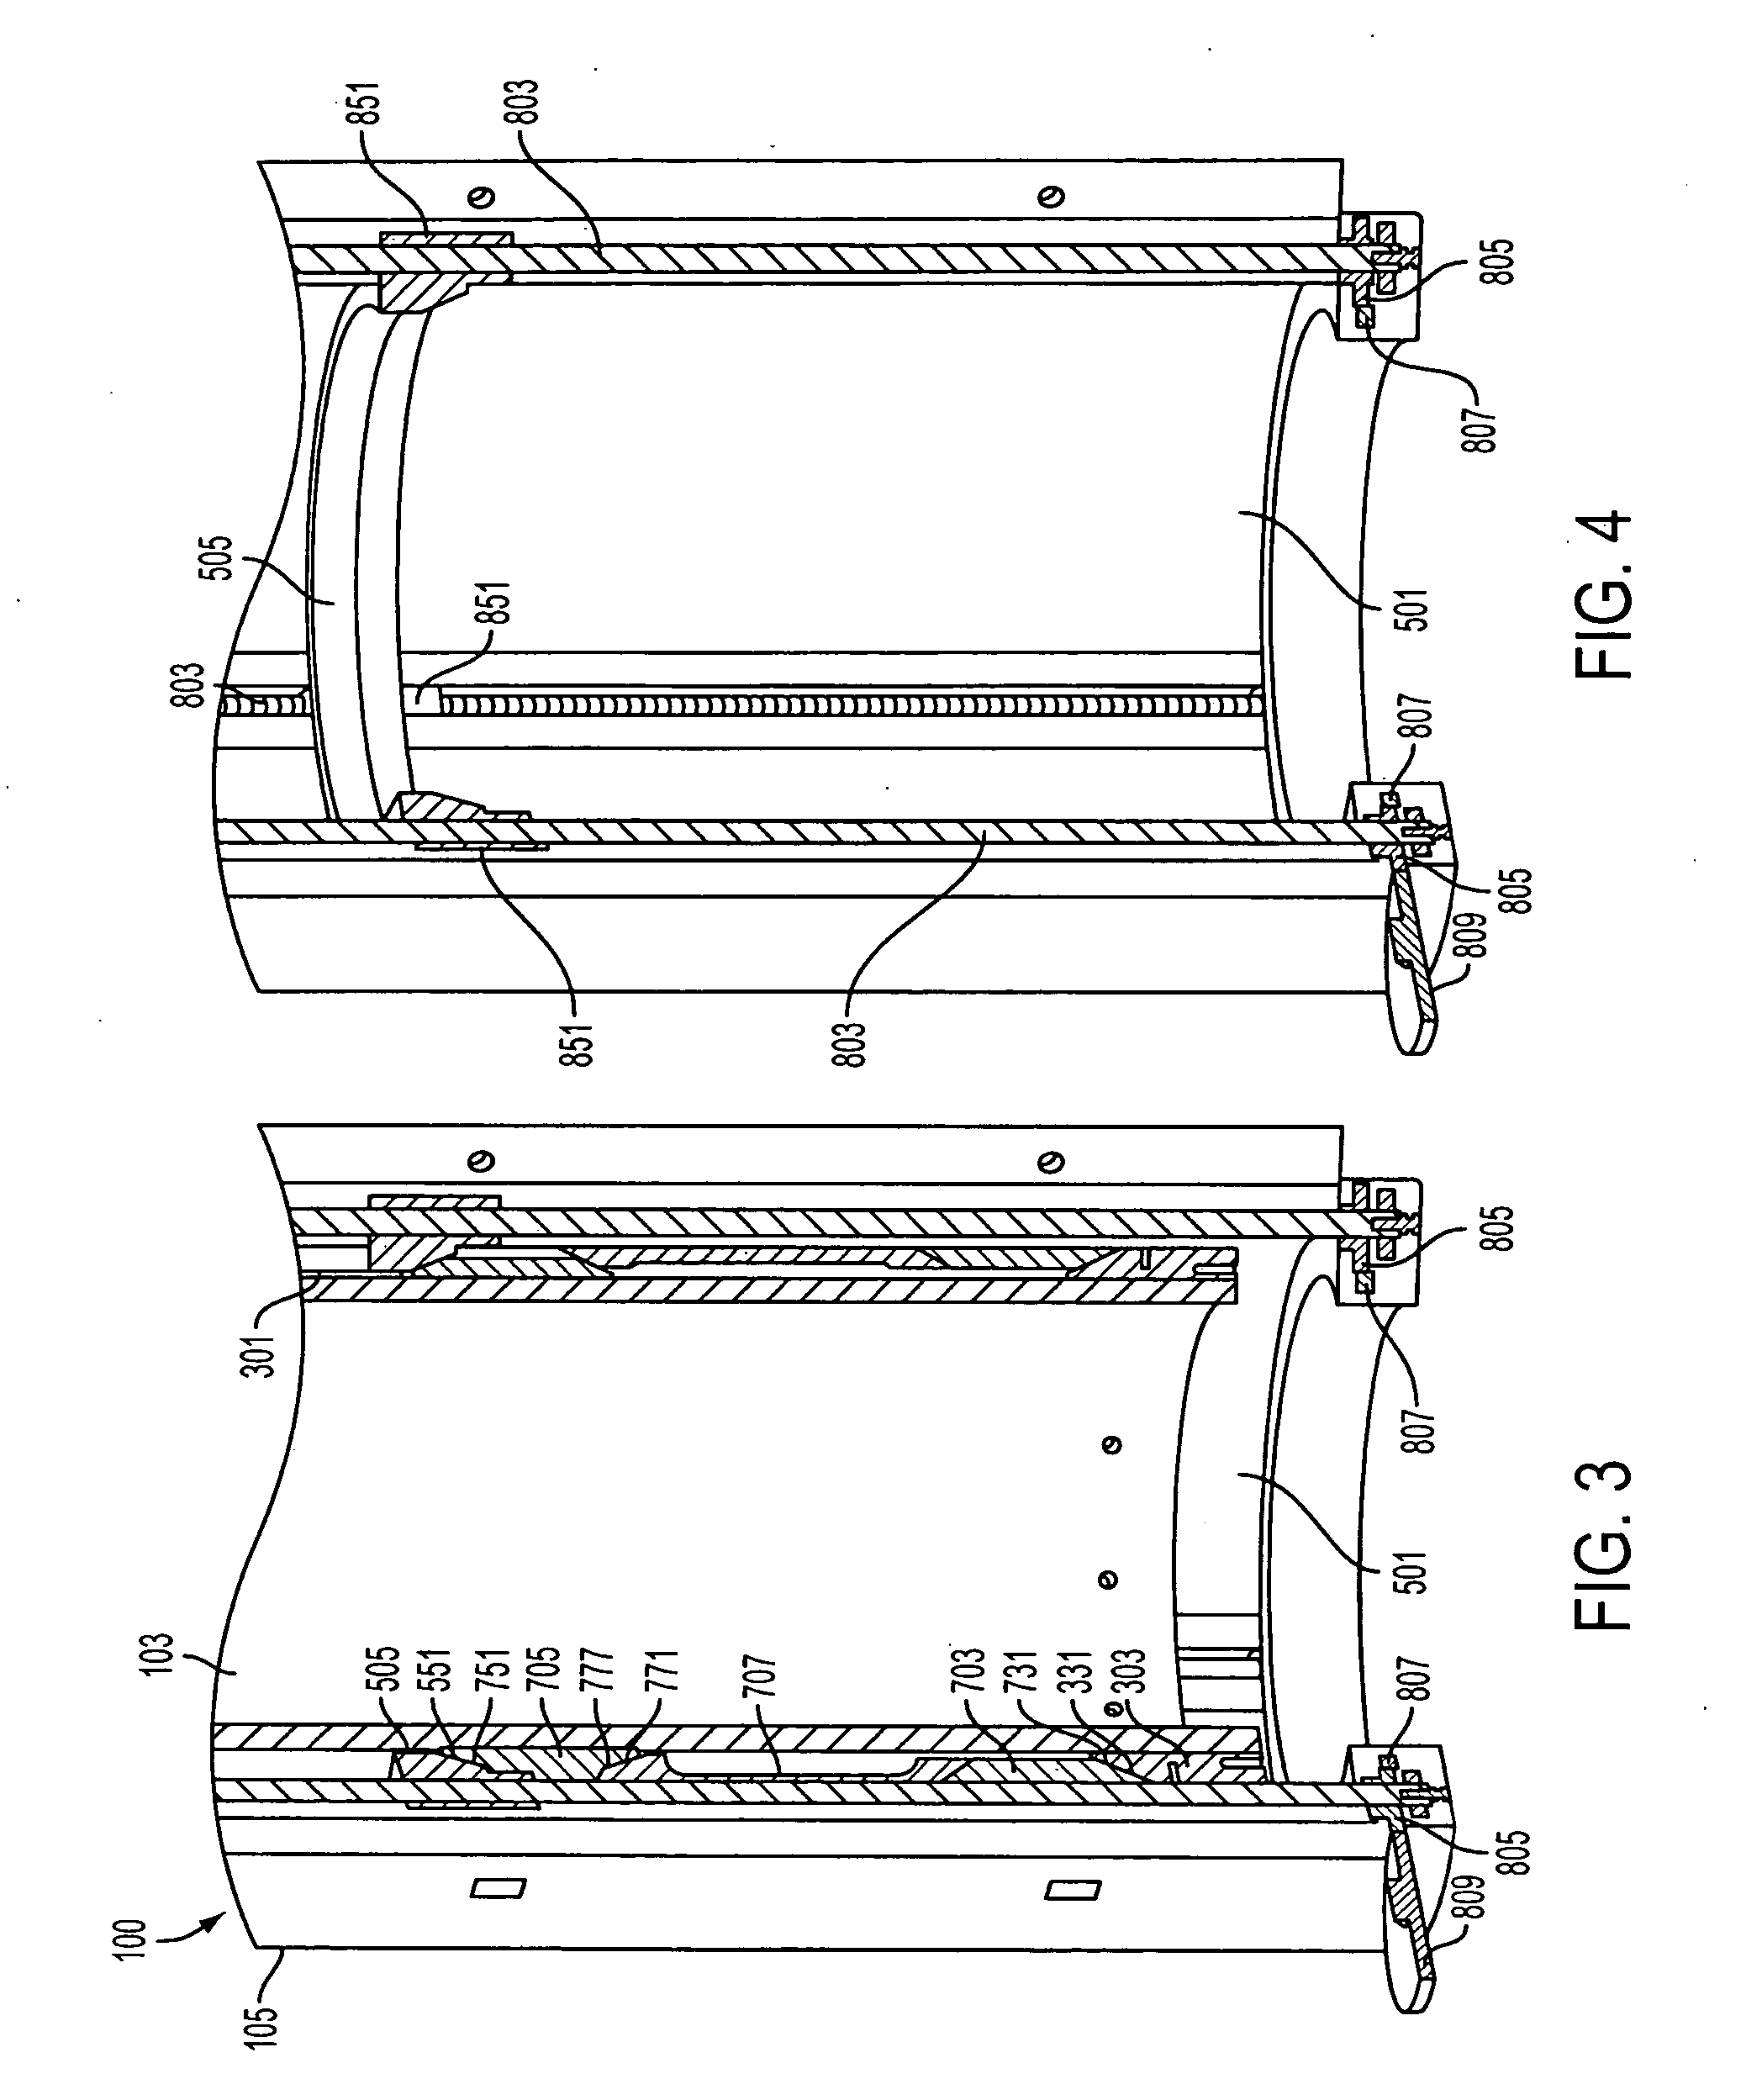 Telescoping mast having variable height locking and a chain erection mechanism with a cable management system